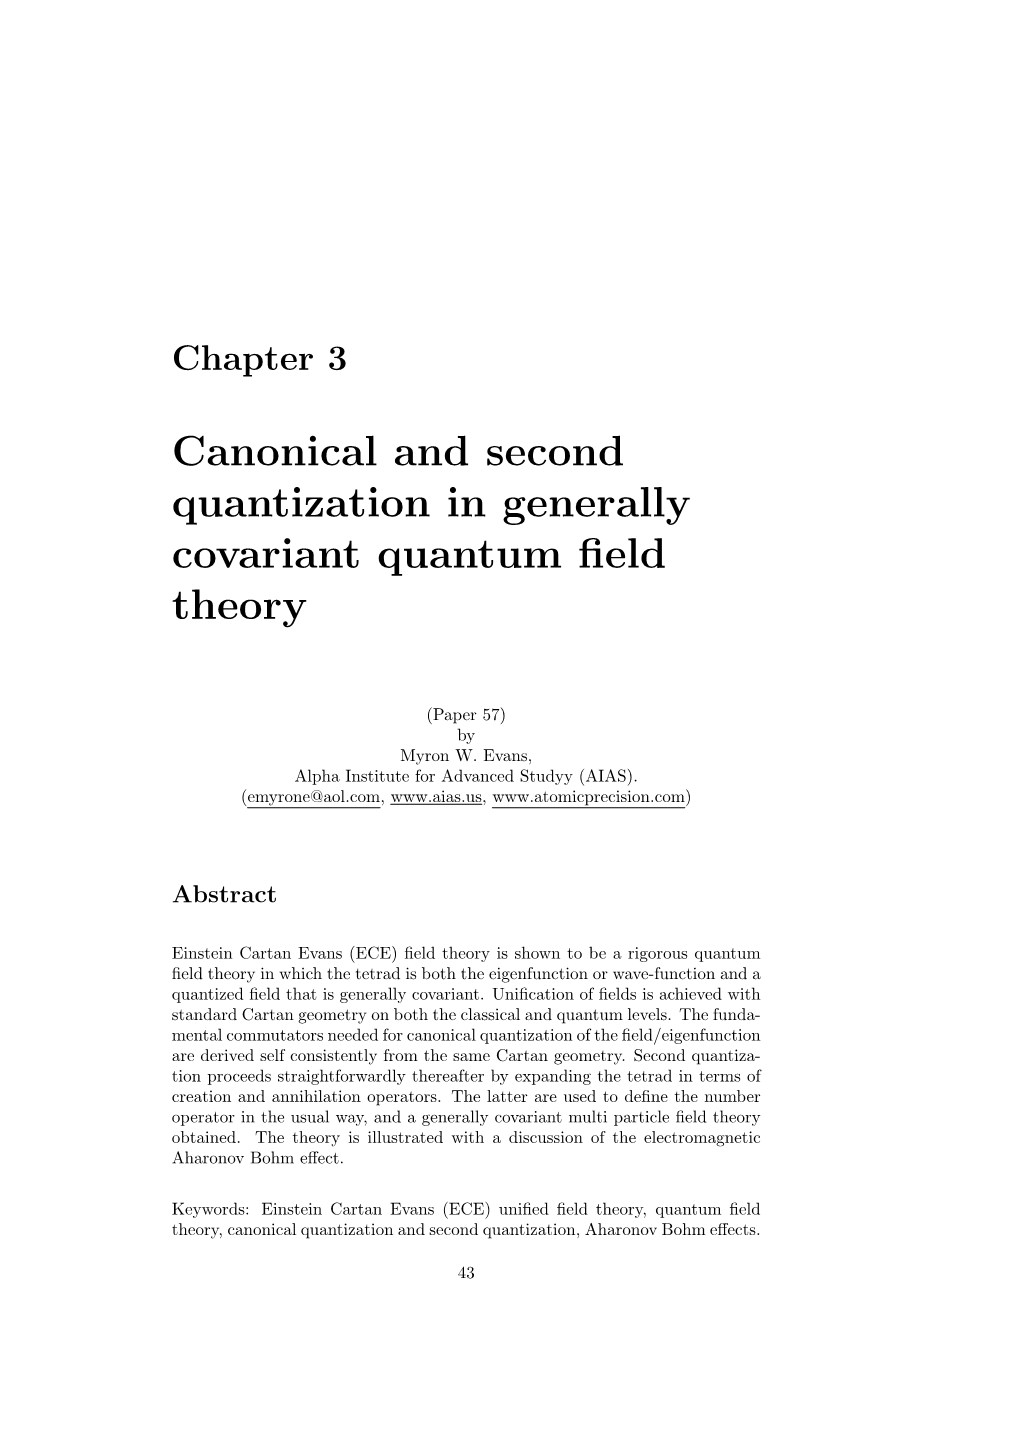 Canonical and Second Quantization in Generally Covariant Quantum Field